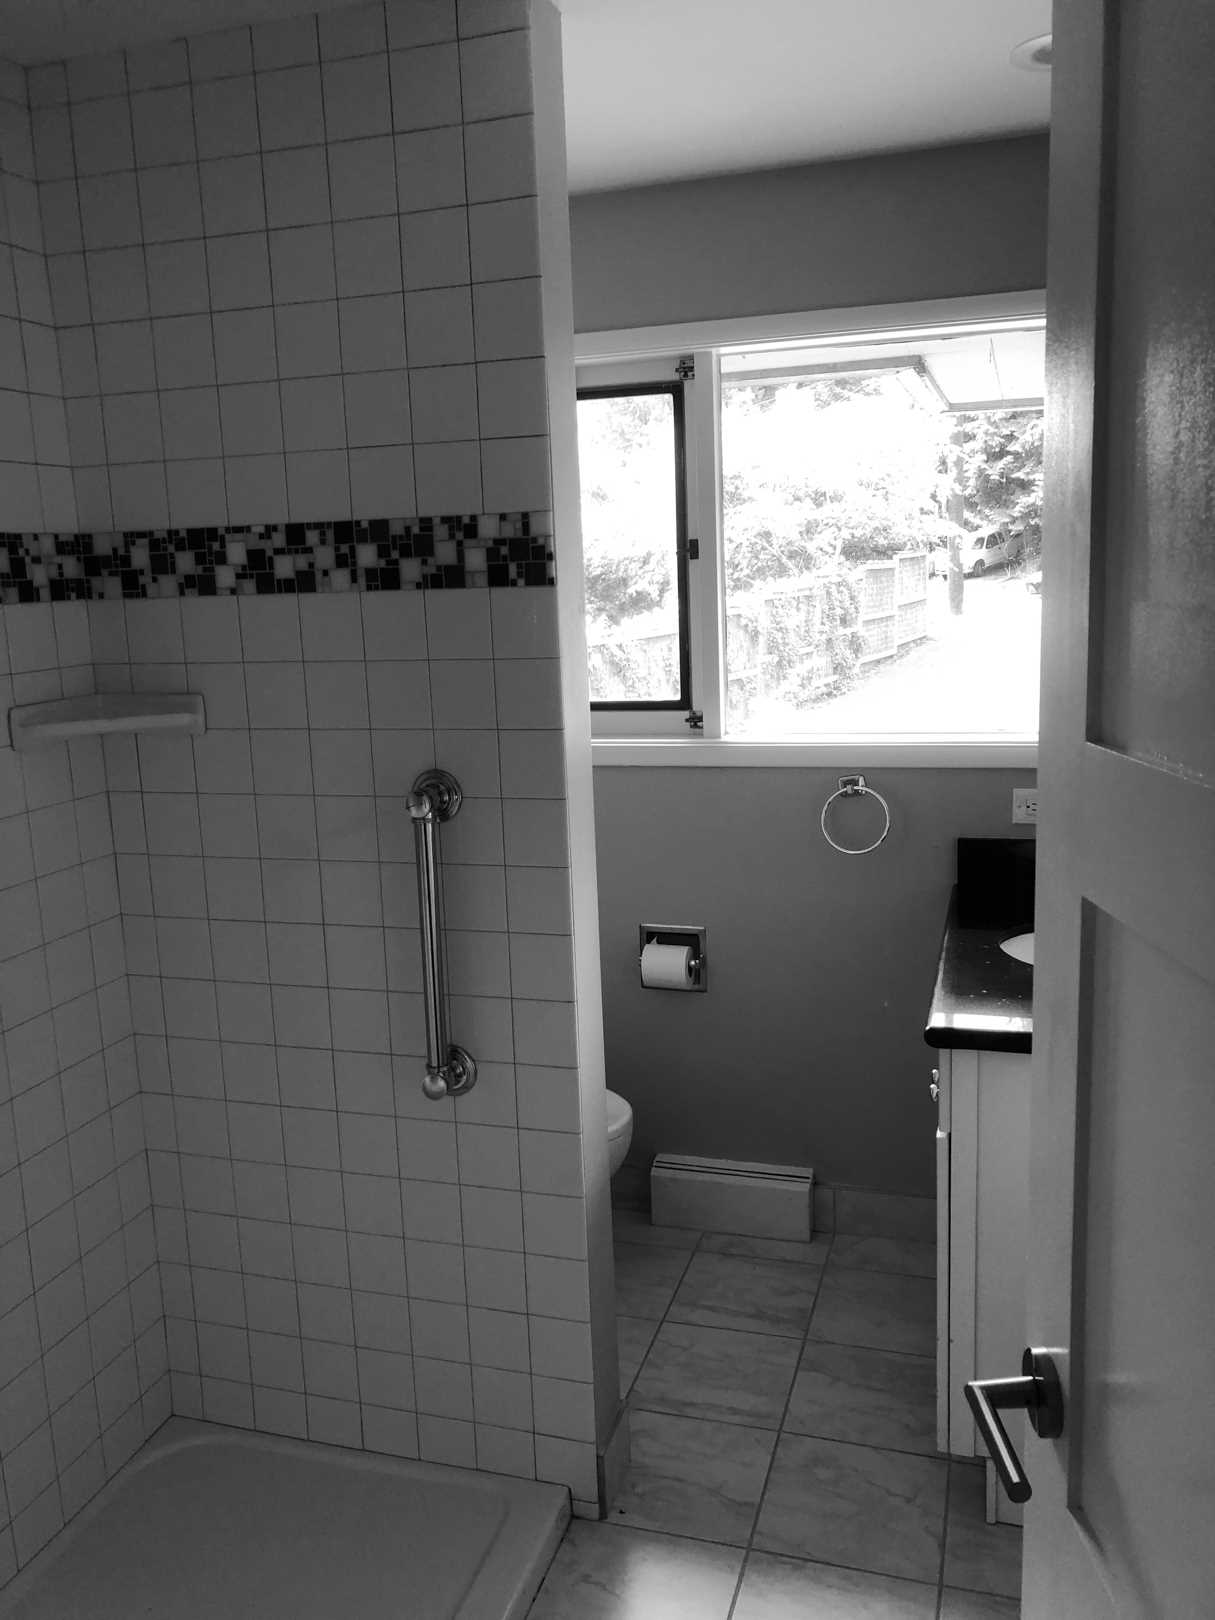 Before - The original bathroom had a small vanity with the toilet by the window, and a shower wall blocking the natural light.